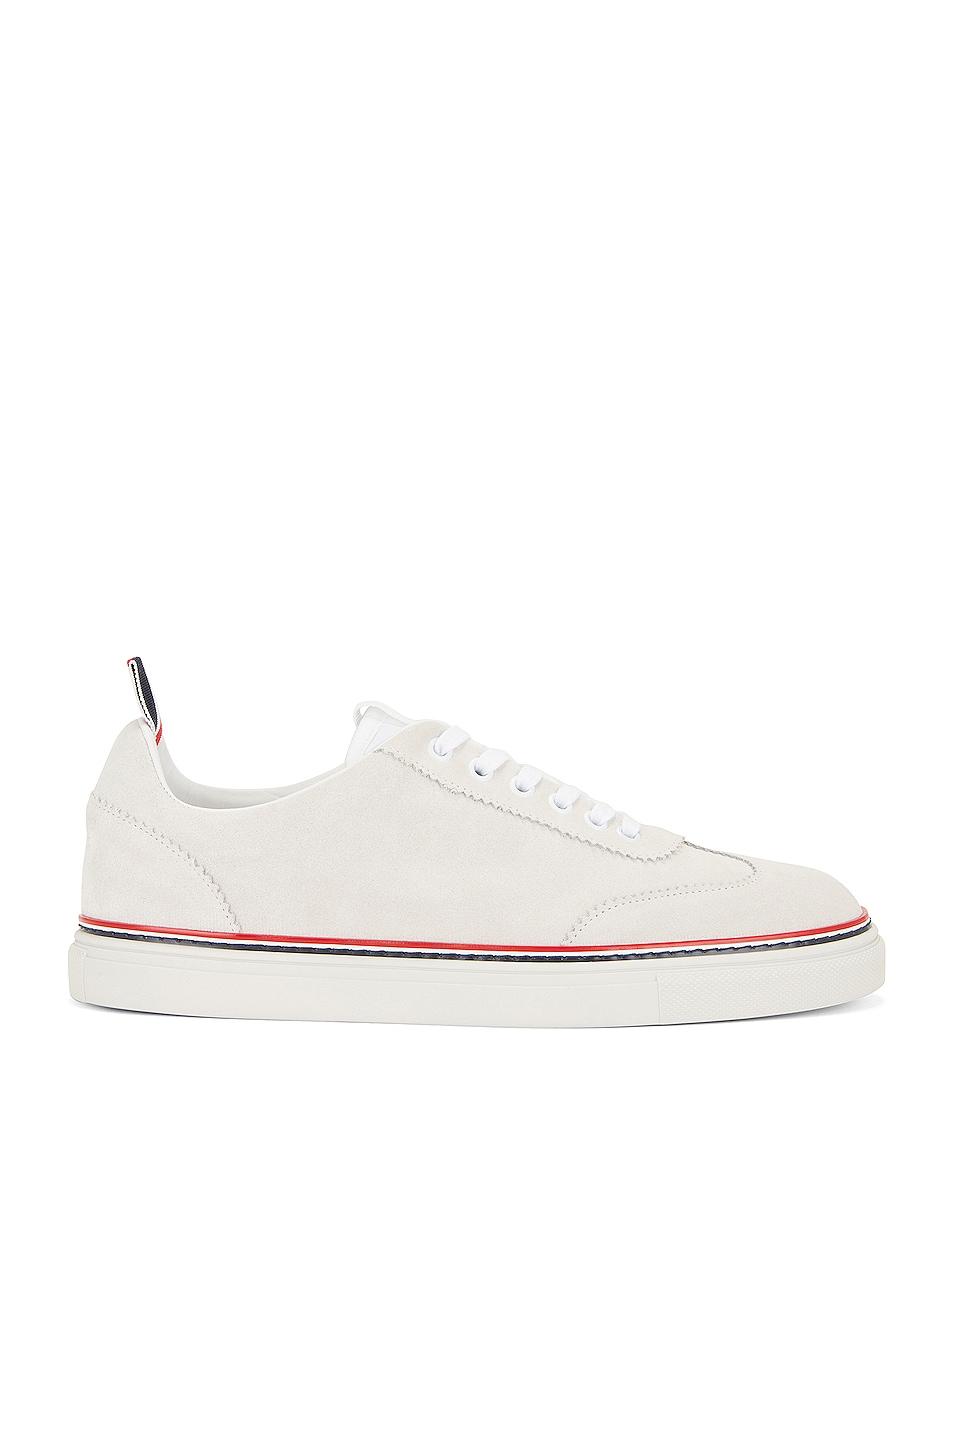 Image 1 of Thom Browne Field Shoe in White